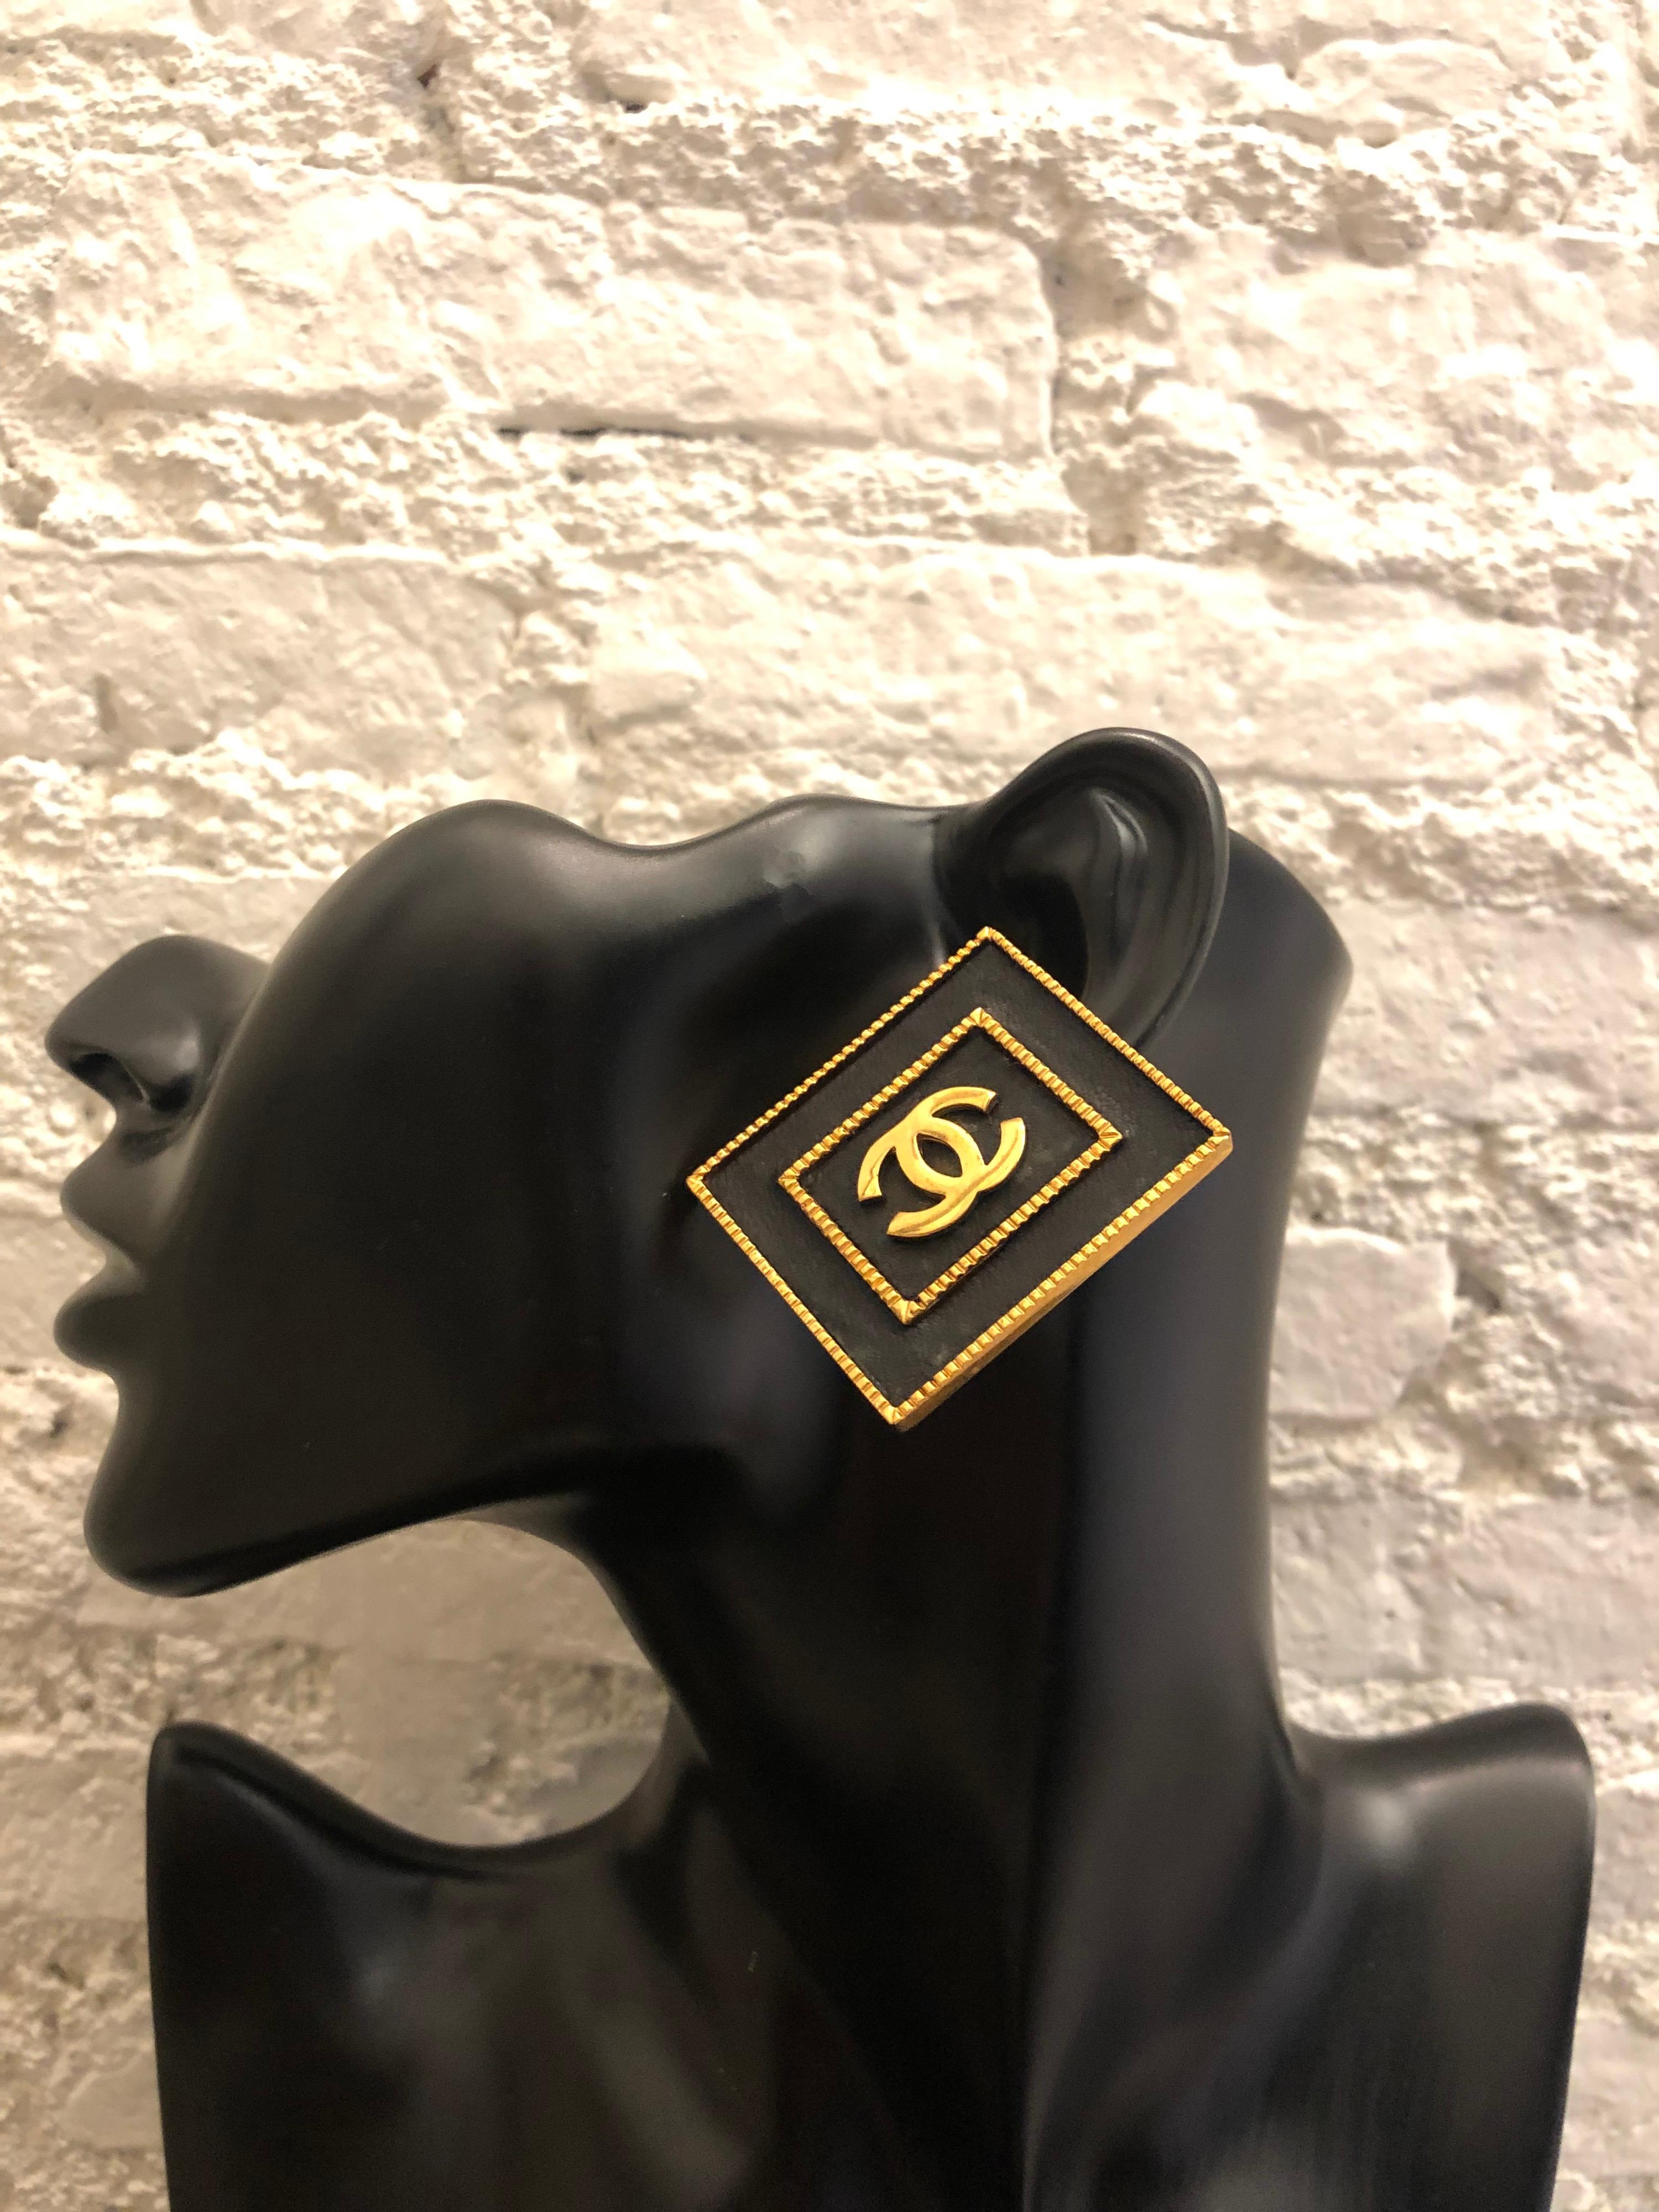 Rare early 1990s gold toned square frame earrings in black leather. Jumbo statement clip-on style earrings. Stamped 28 made in France. Measures 4 x 3.4 cm.

Condition - Minor signs of wear consistent with age and normal use

Front - some marks and